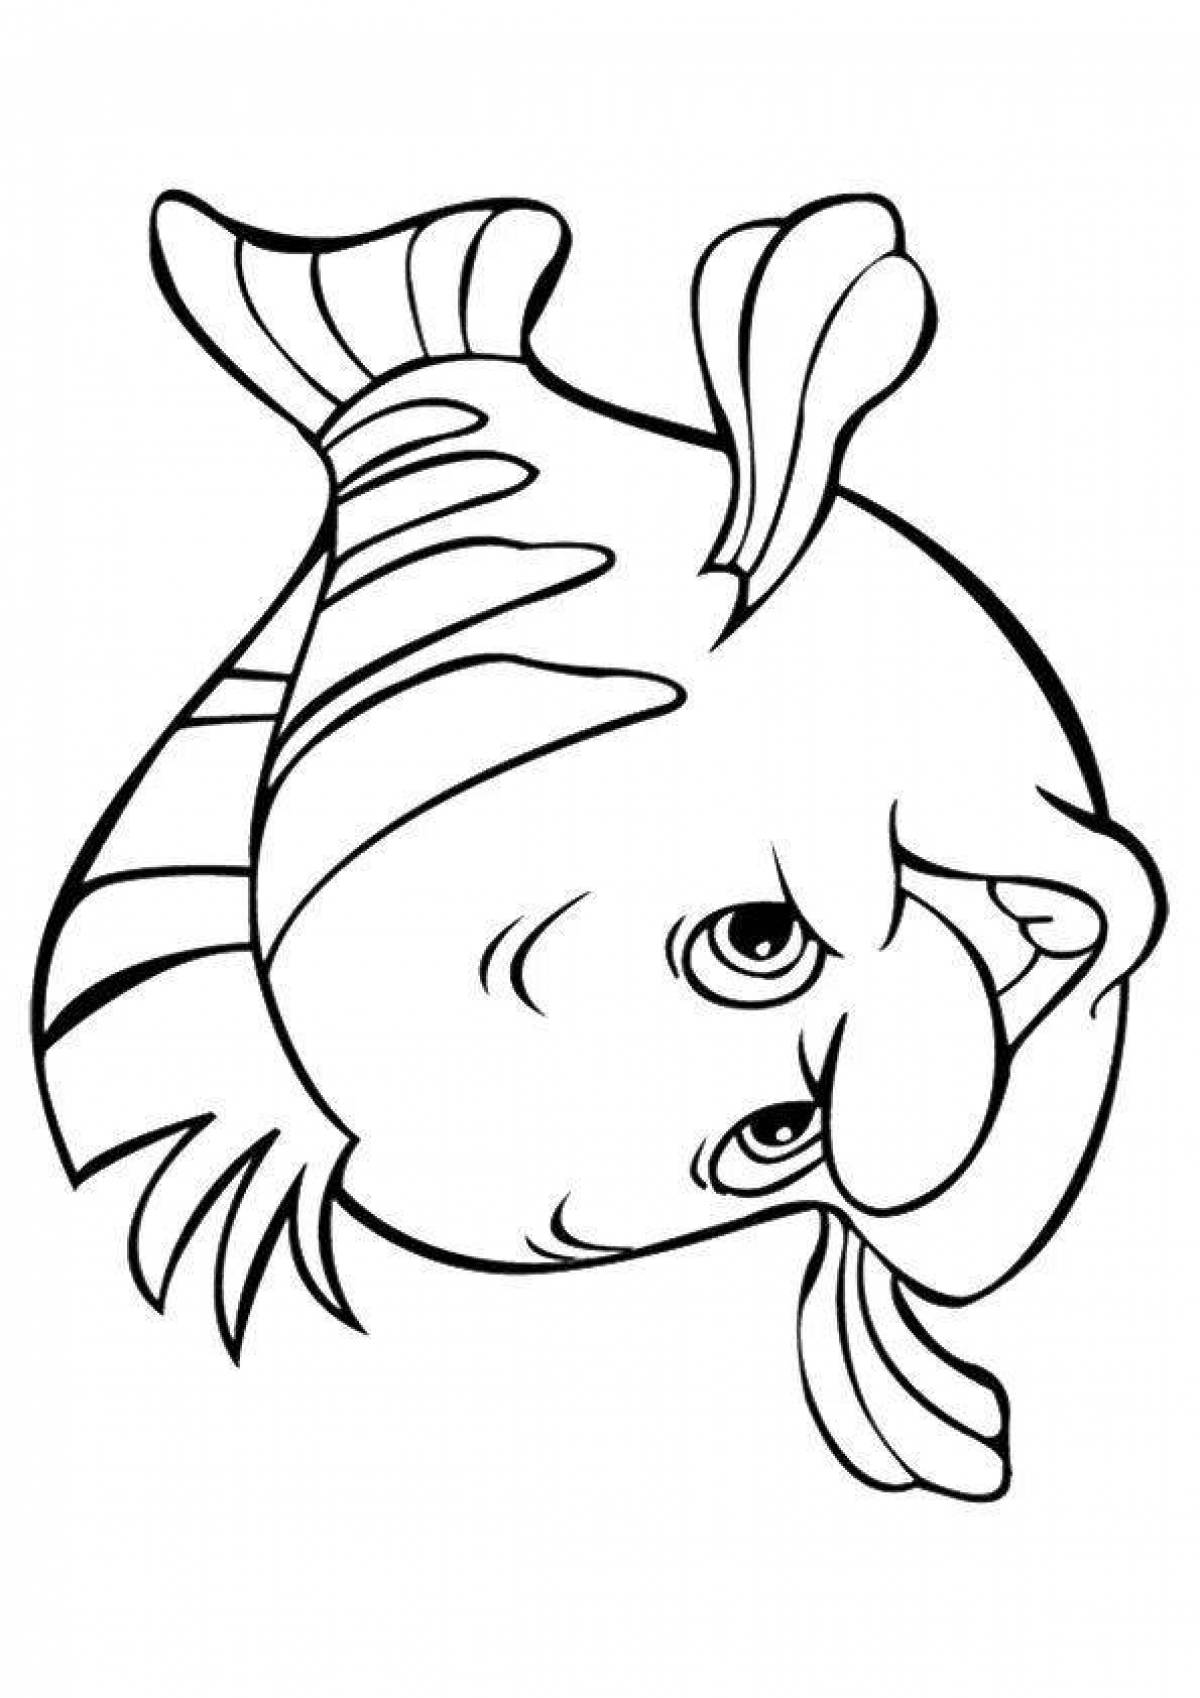 Sparkling float coloring page